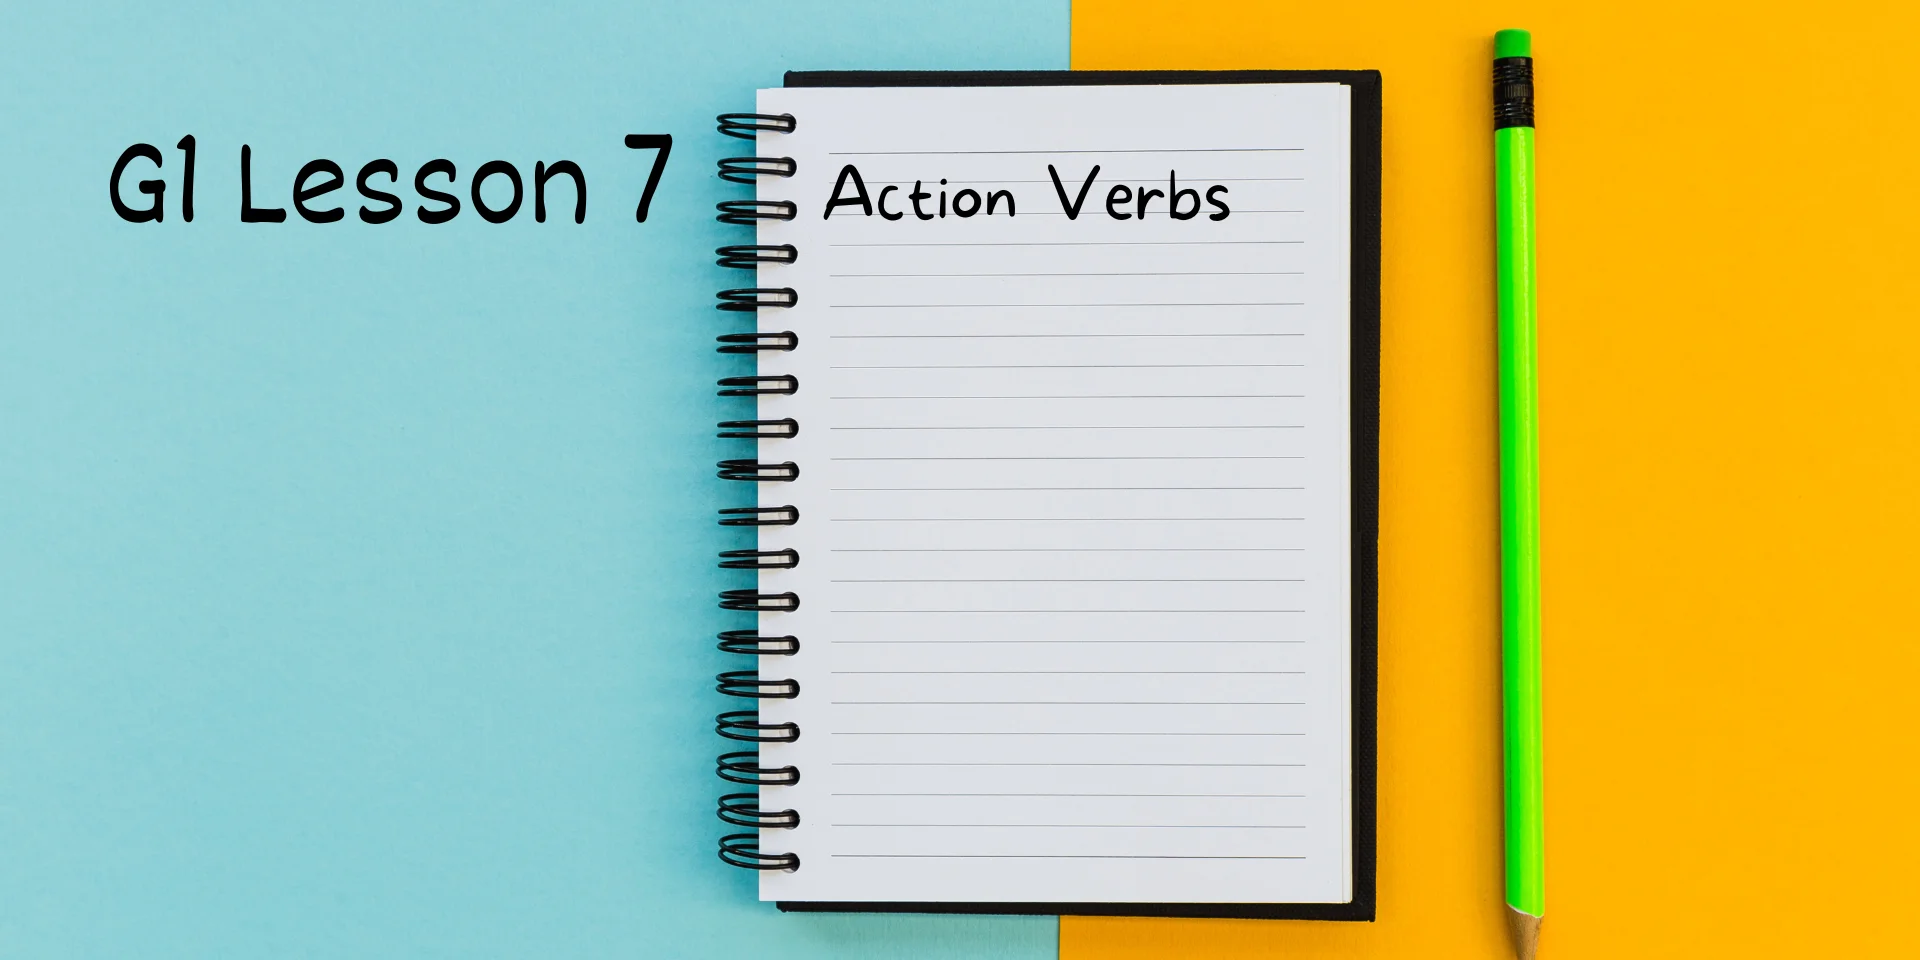 G1 Lesson 7 Action Verbs